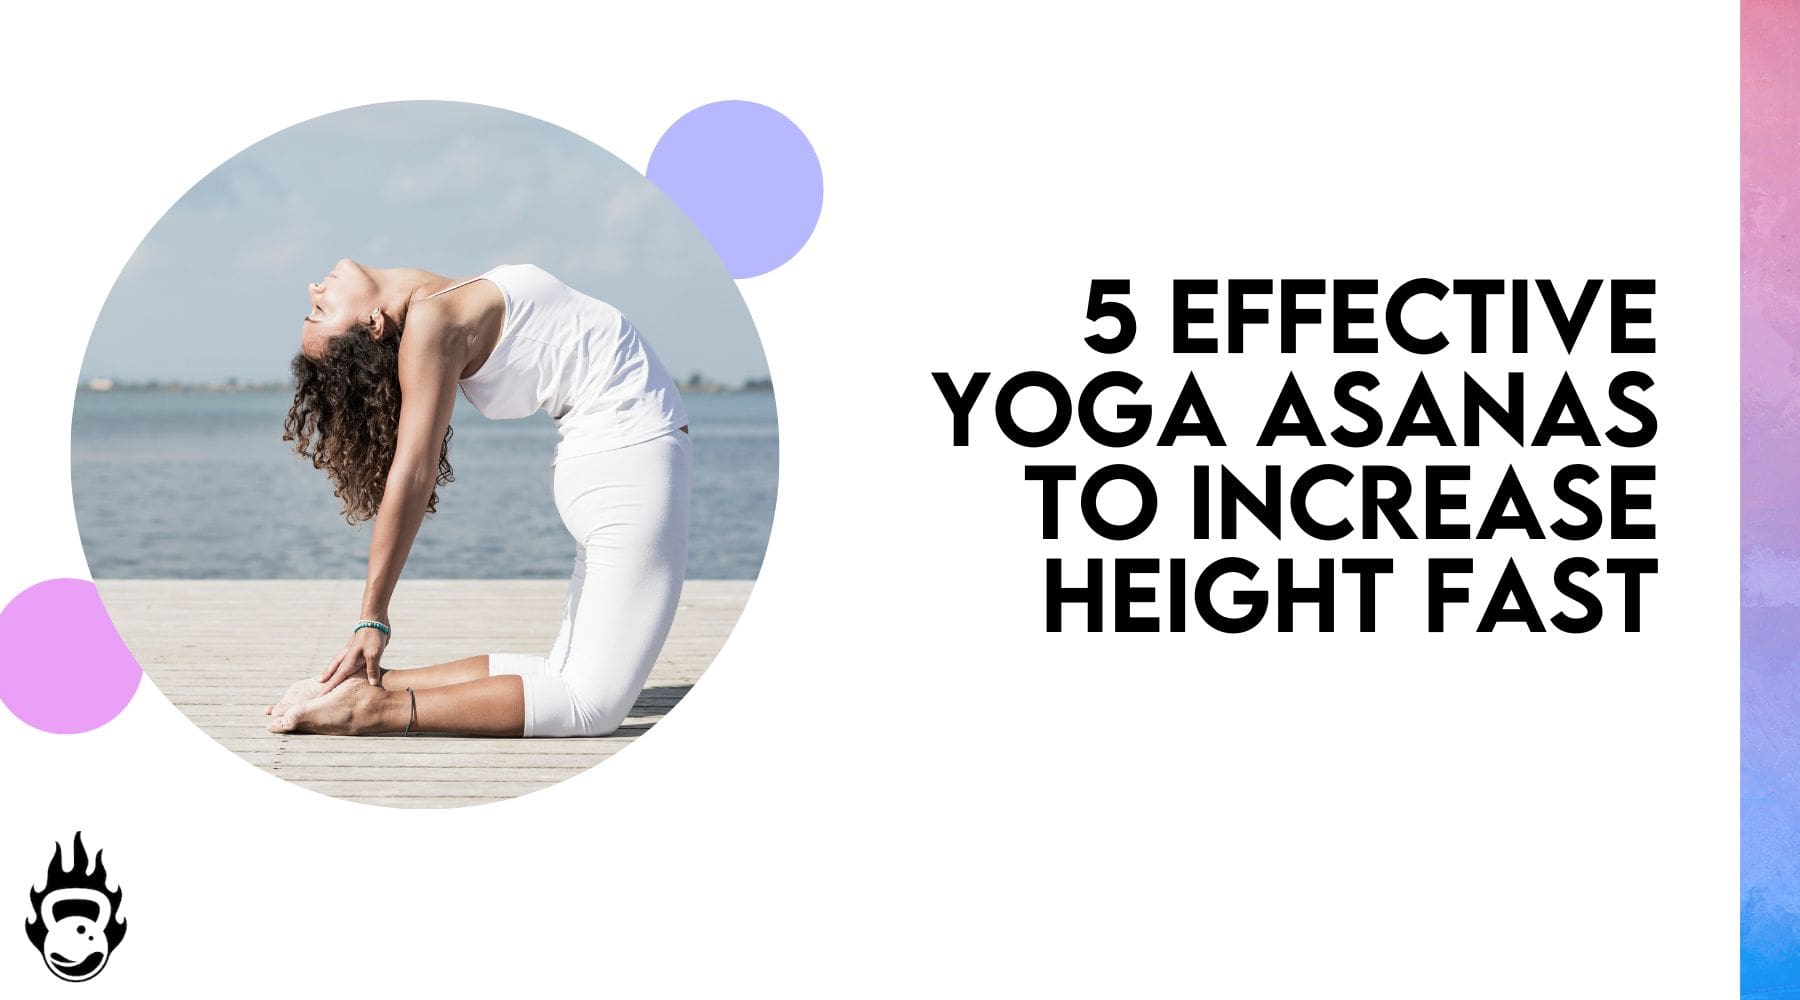 Yoga: What makes it one of the best ways to develop flexibility